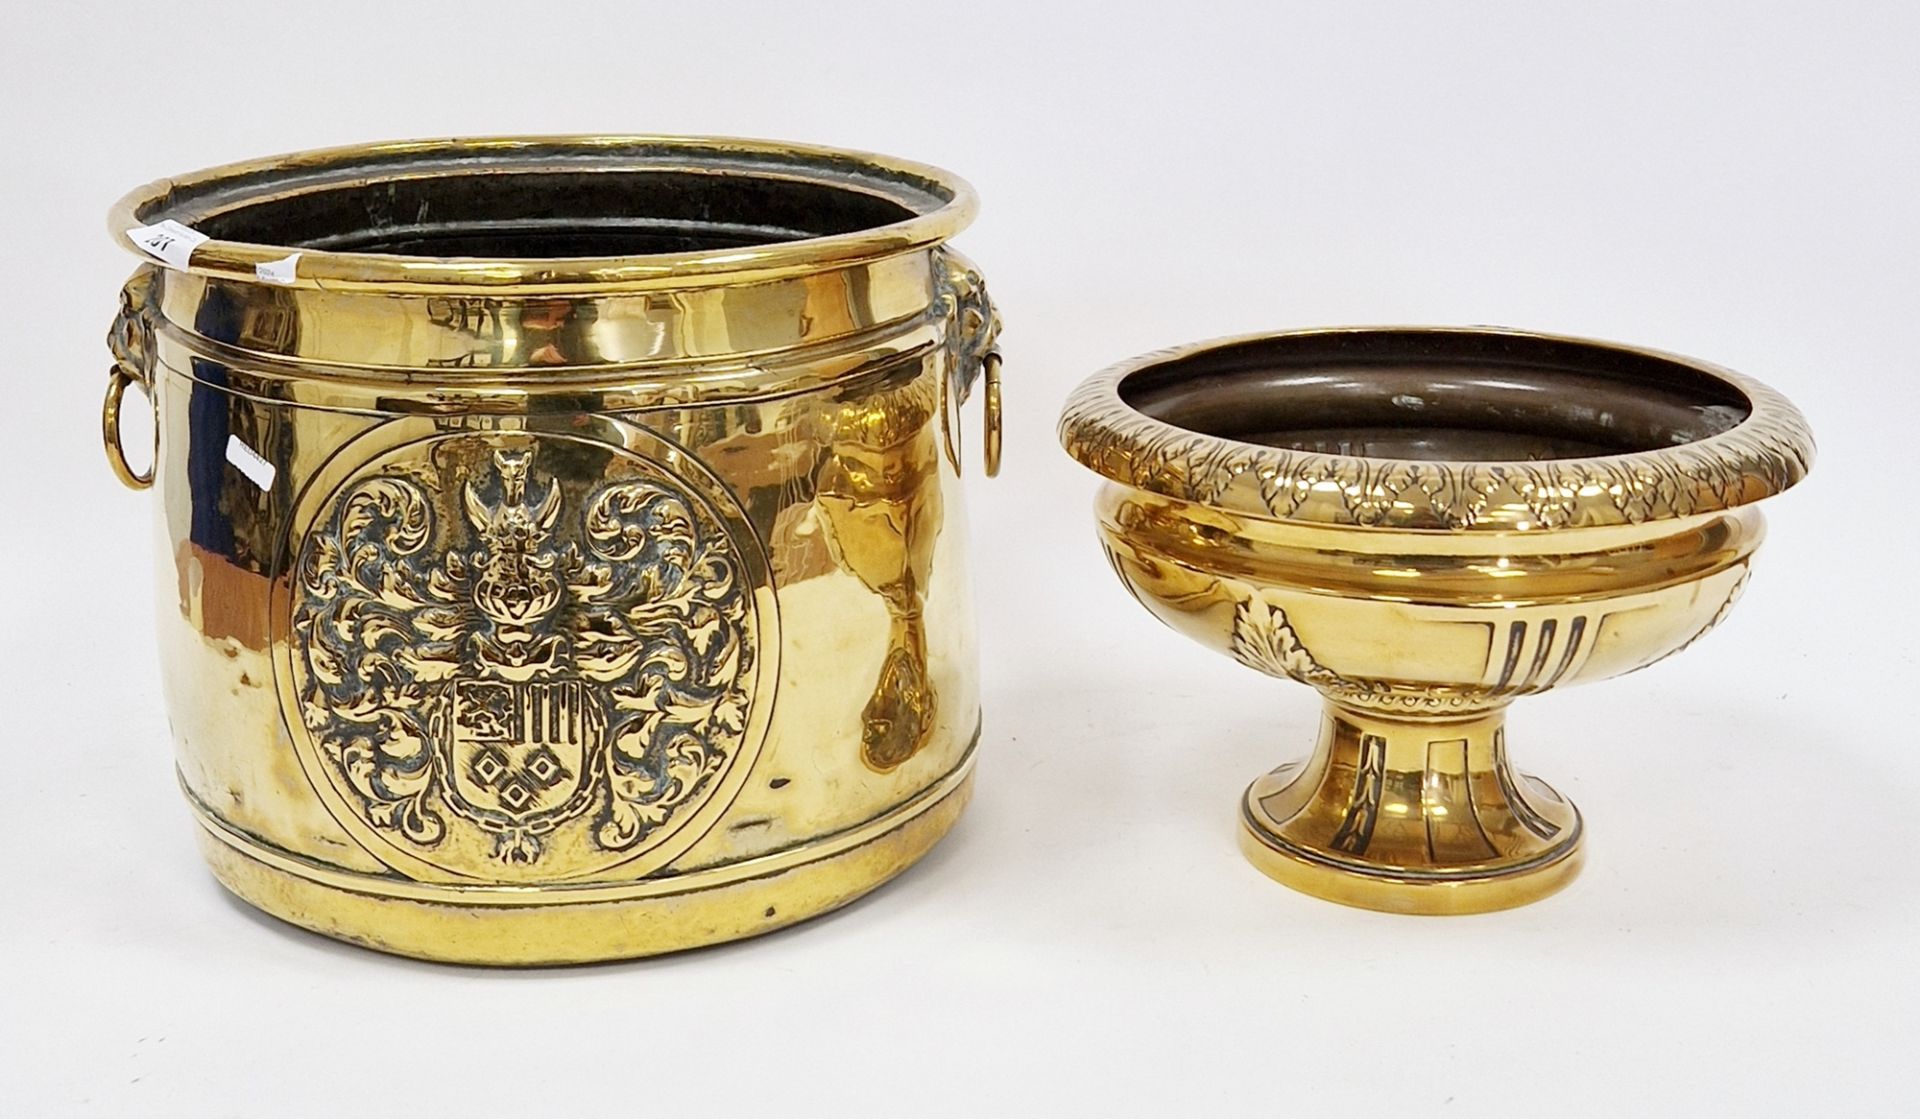 Edwardian embossed brass coal scuttle of cylindrical form, decorated with a mantled armorial, with - Image 6 of 6